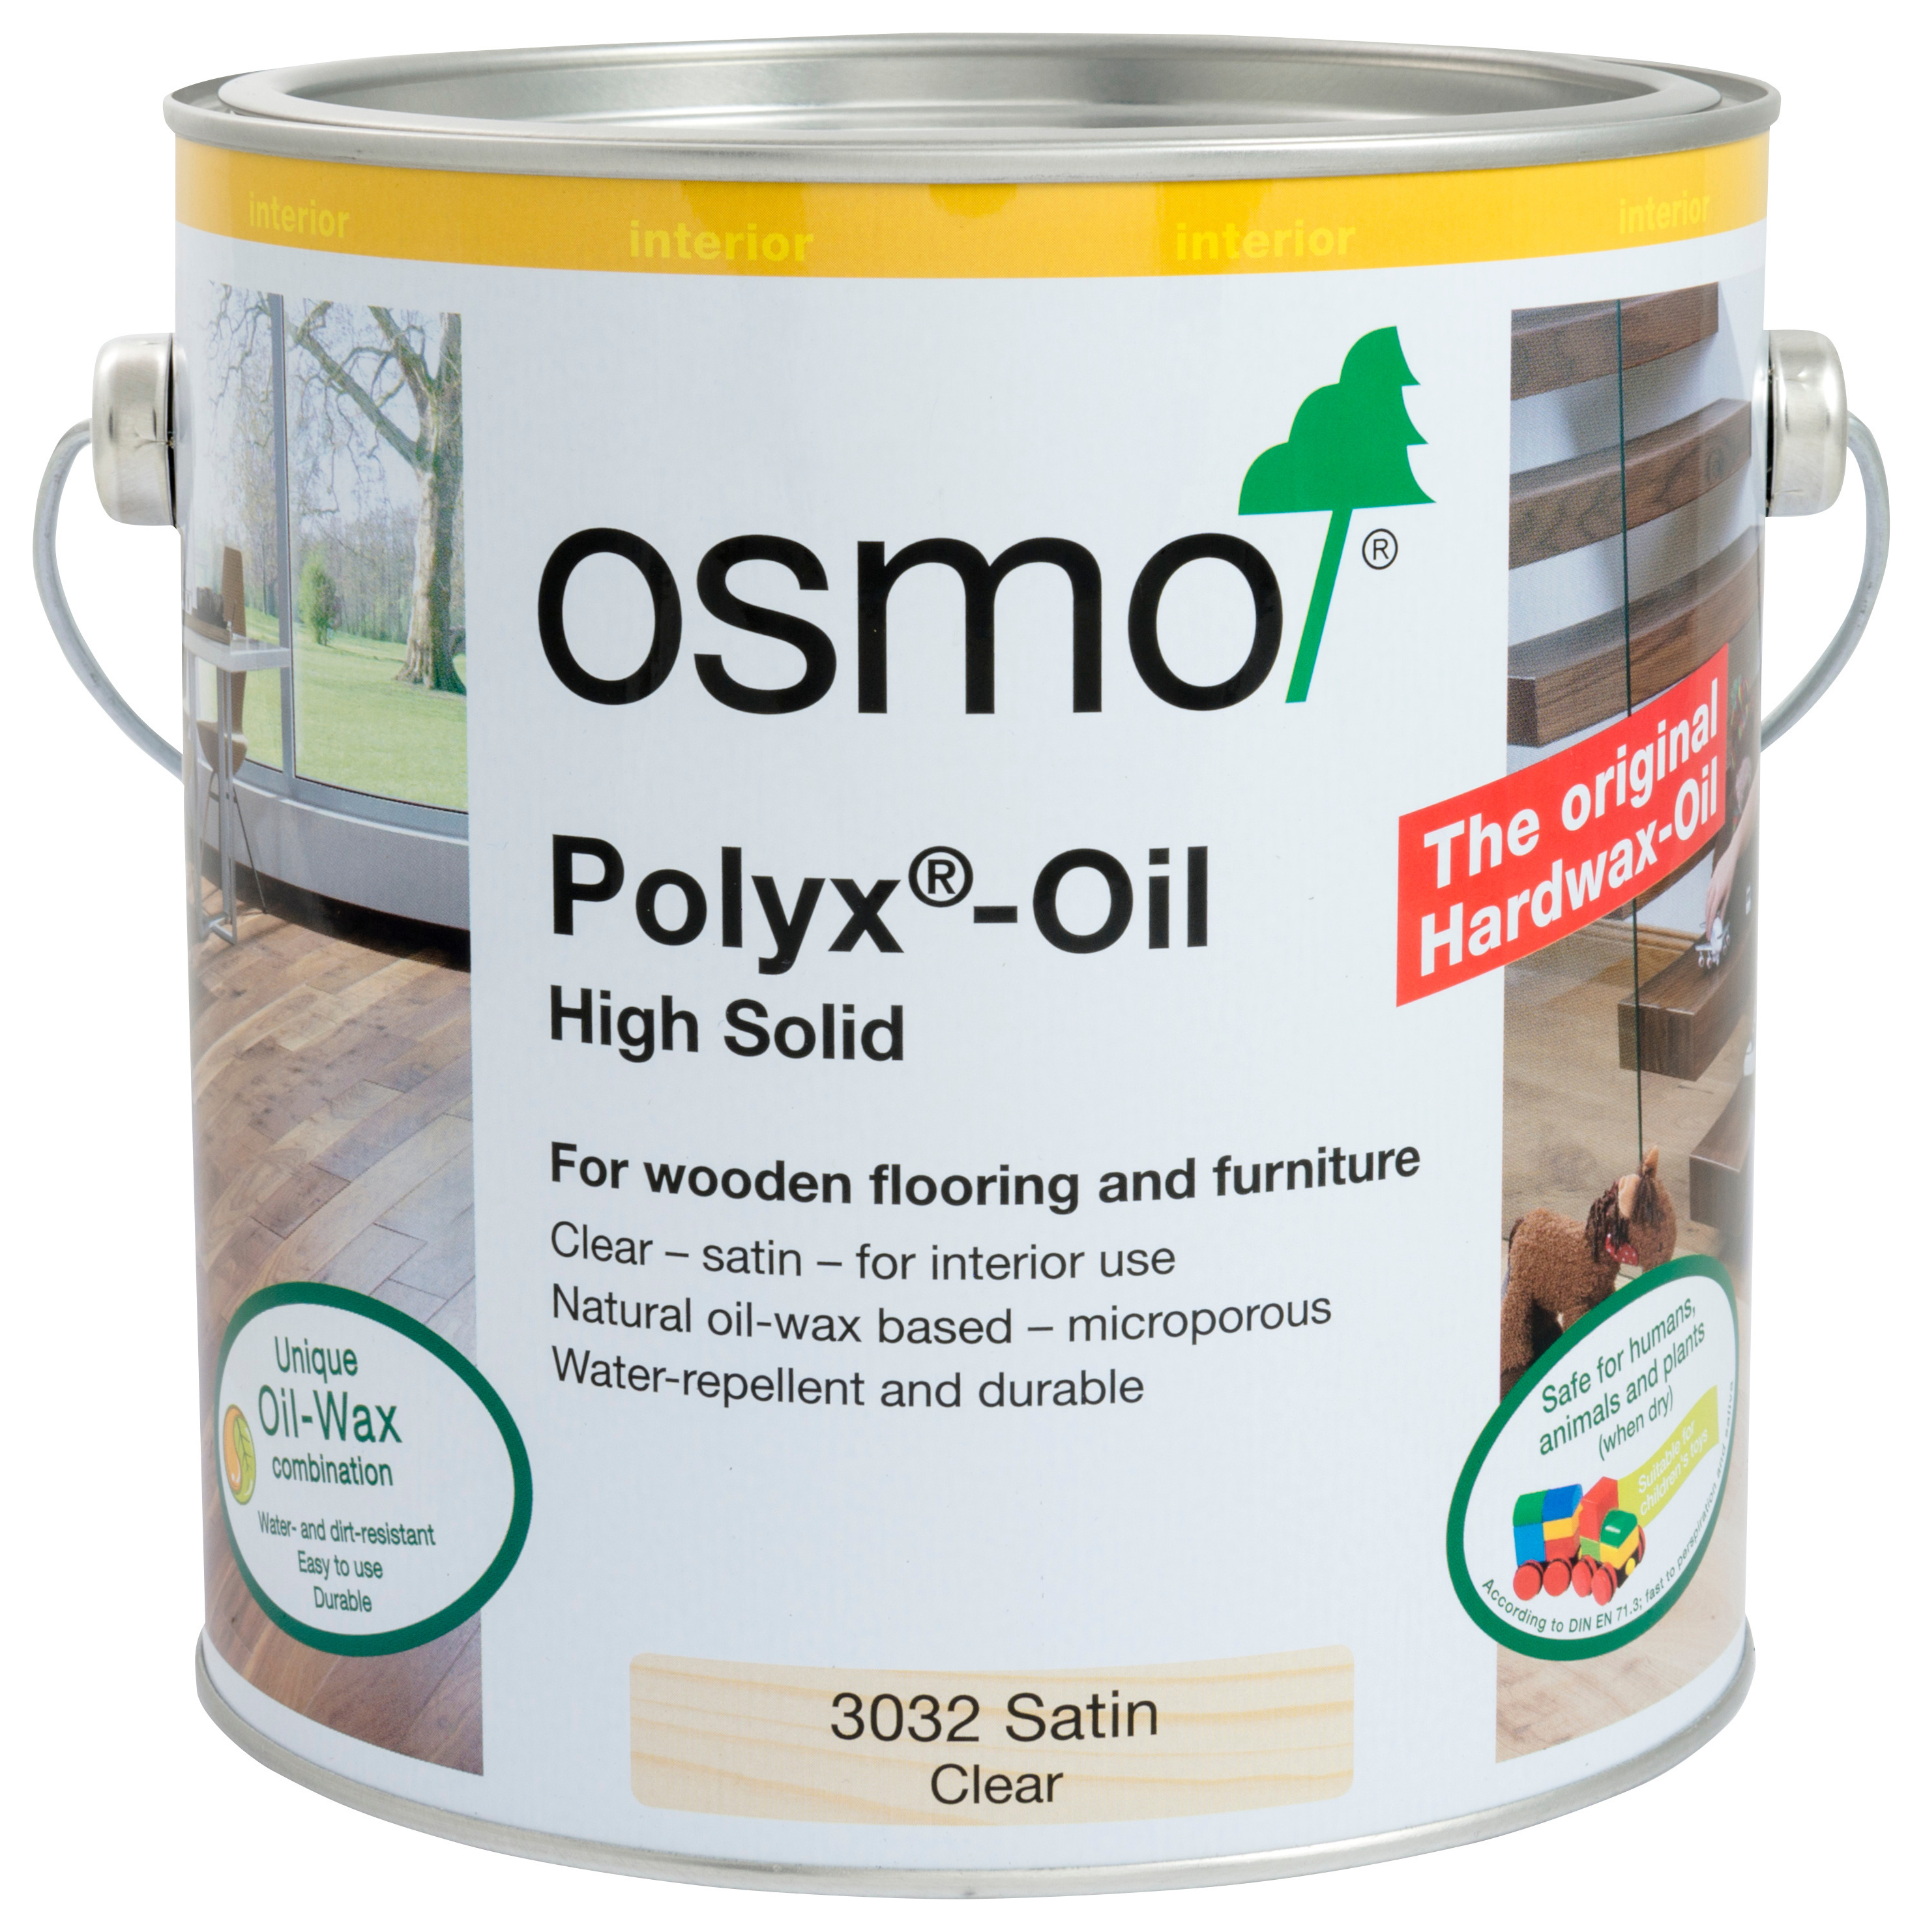 Image of Osmo Polyx Wood Oil - Satin - 2.5L